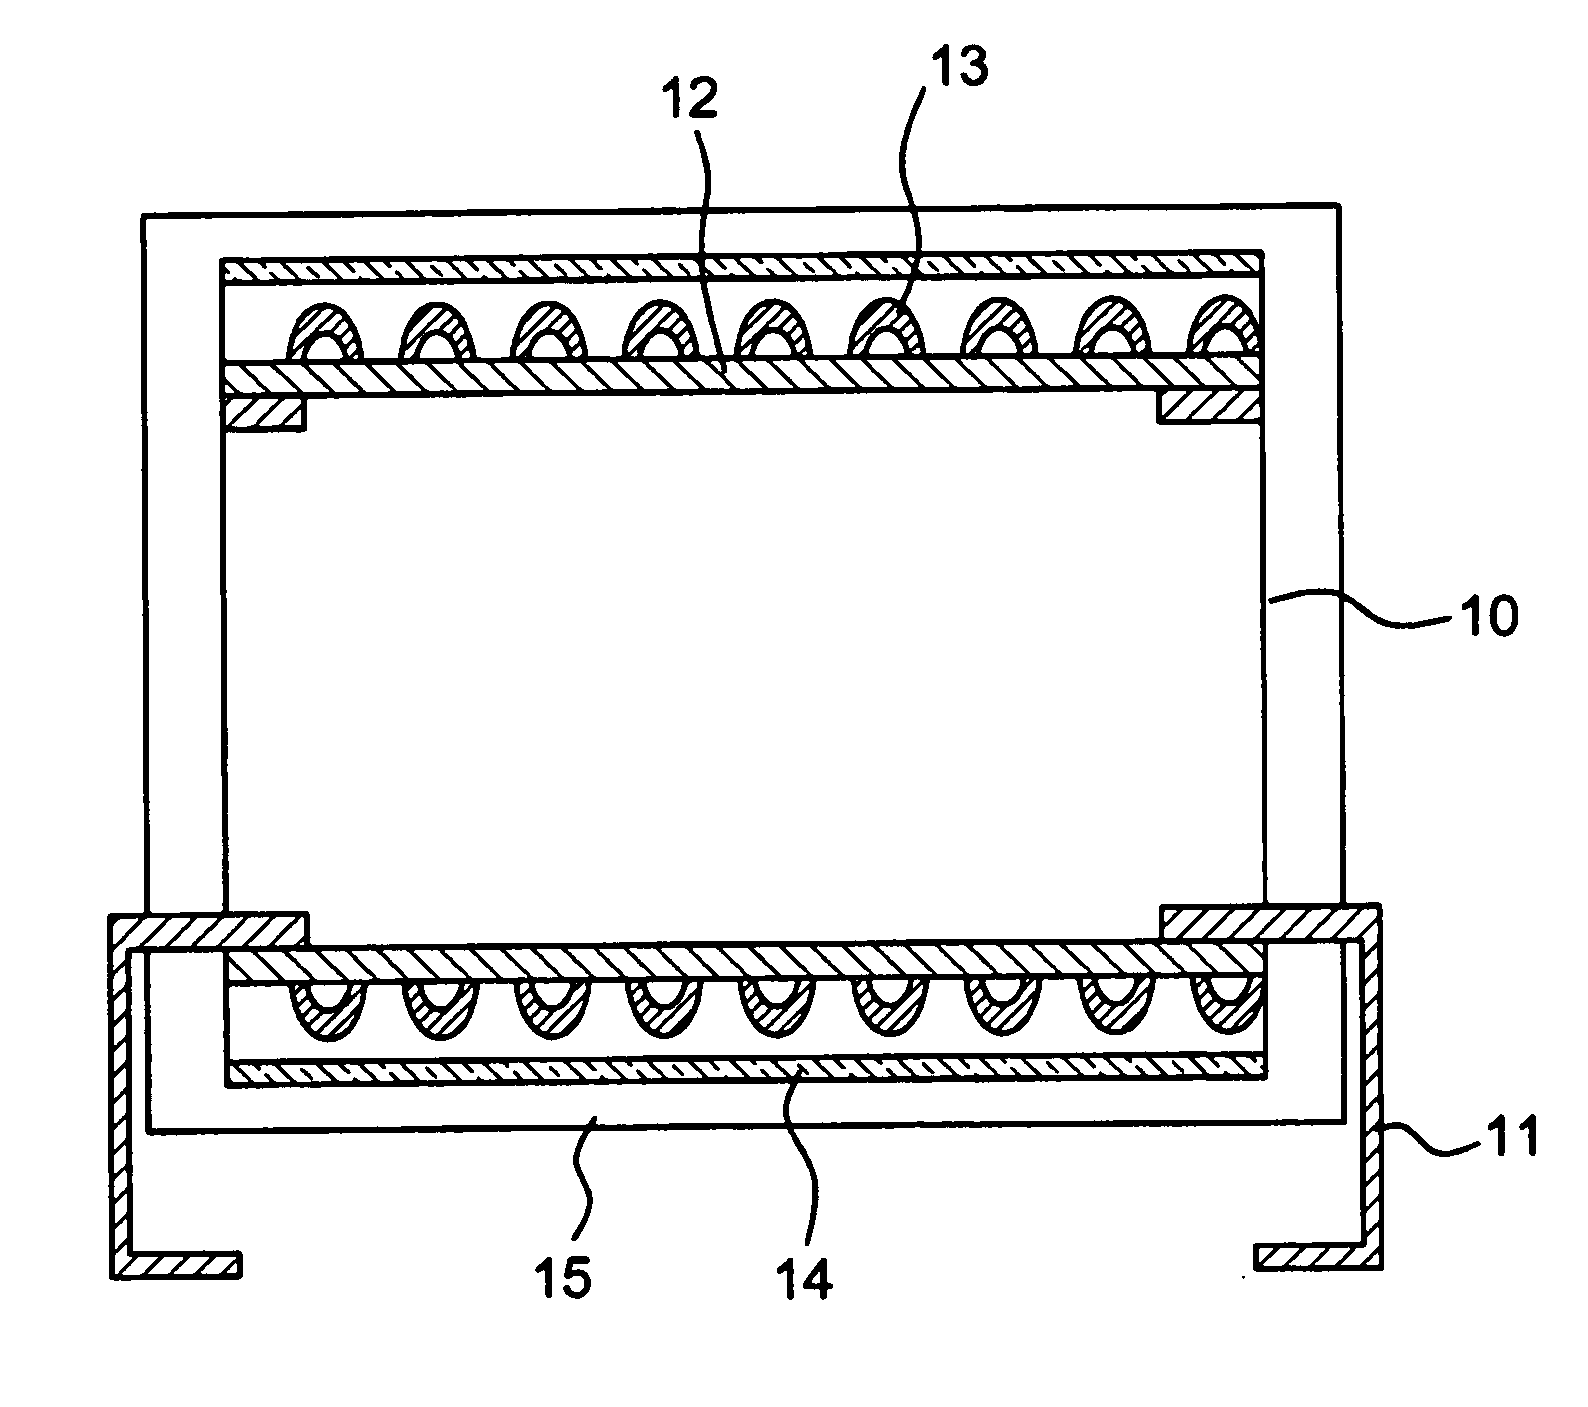 Structure of an over-current protection device and method for manufacturing the same